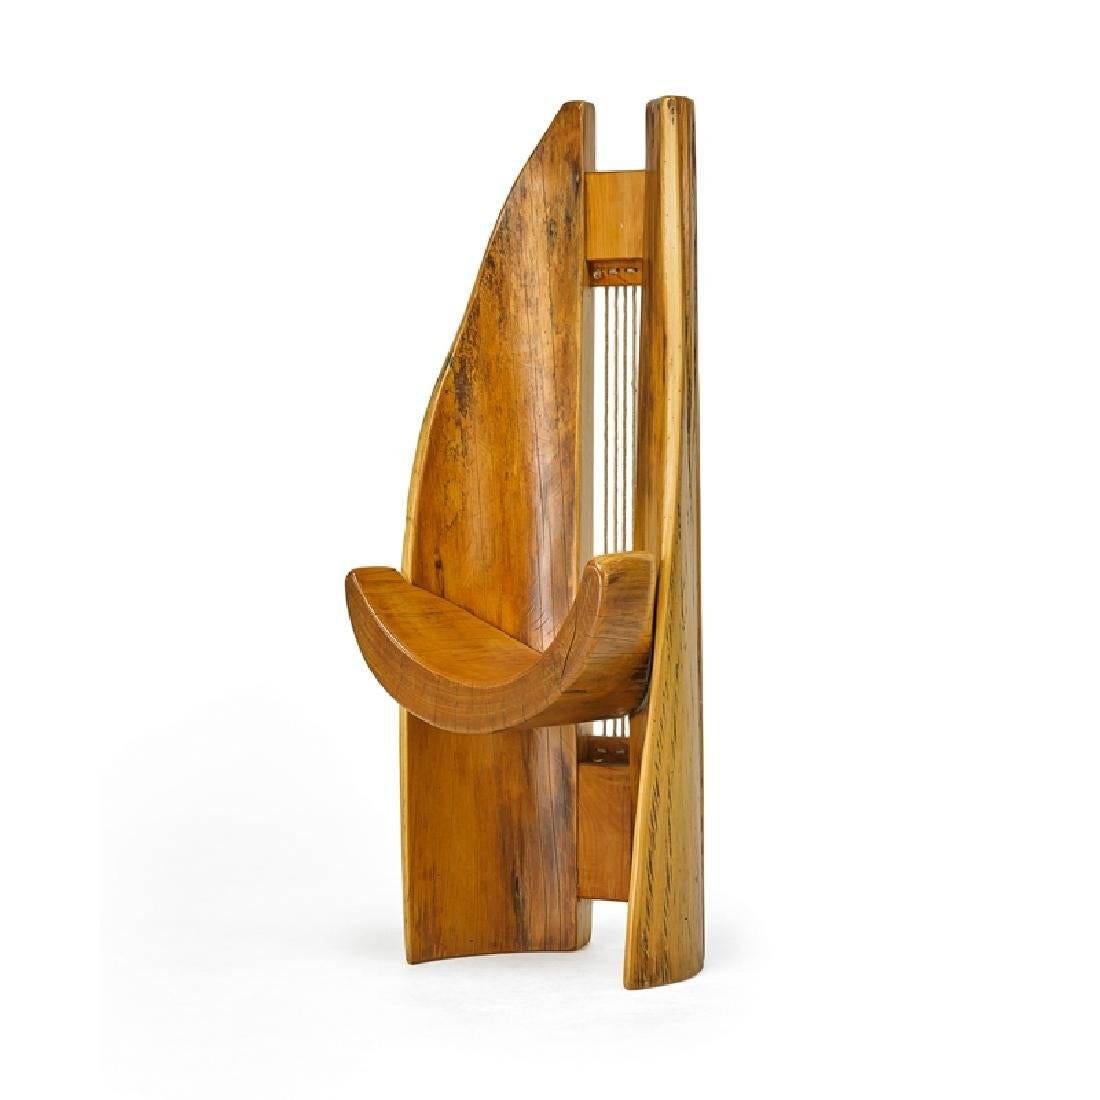 A tall sculptural chair designed and made by Hugo Franca (b. 1954), a Brazilian furniture artist known for his use of reclaimed wood from his native country and an organic approach to his design that highlight the intrinsic beauty of the wood, the